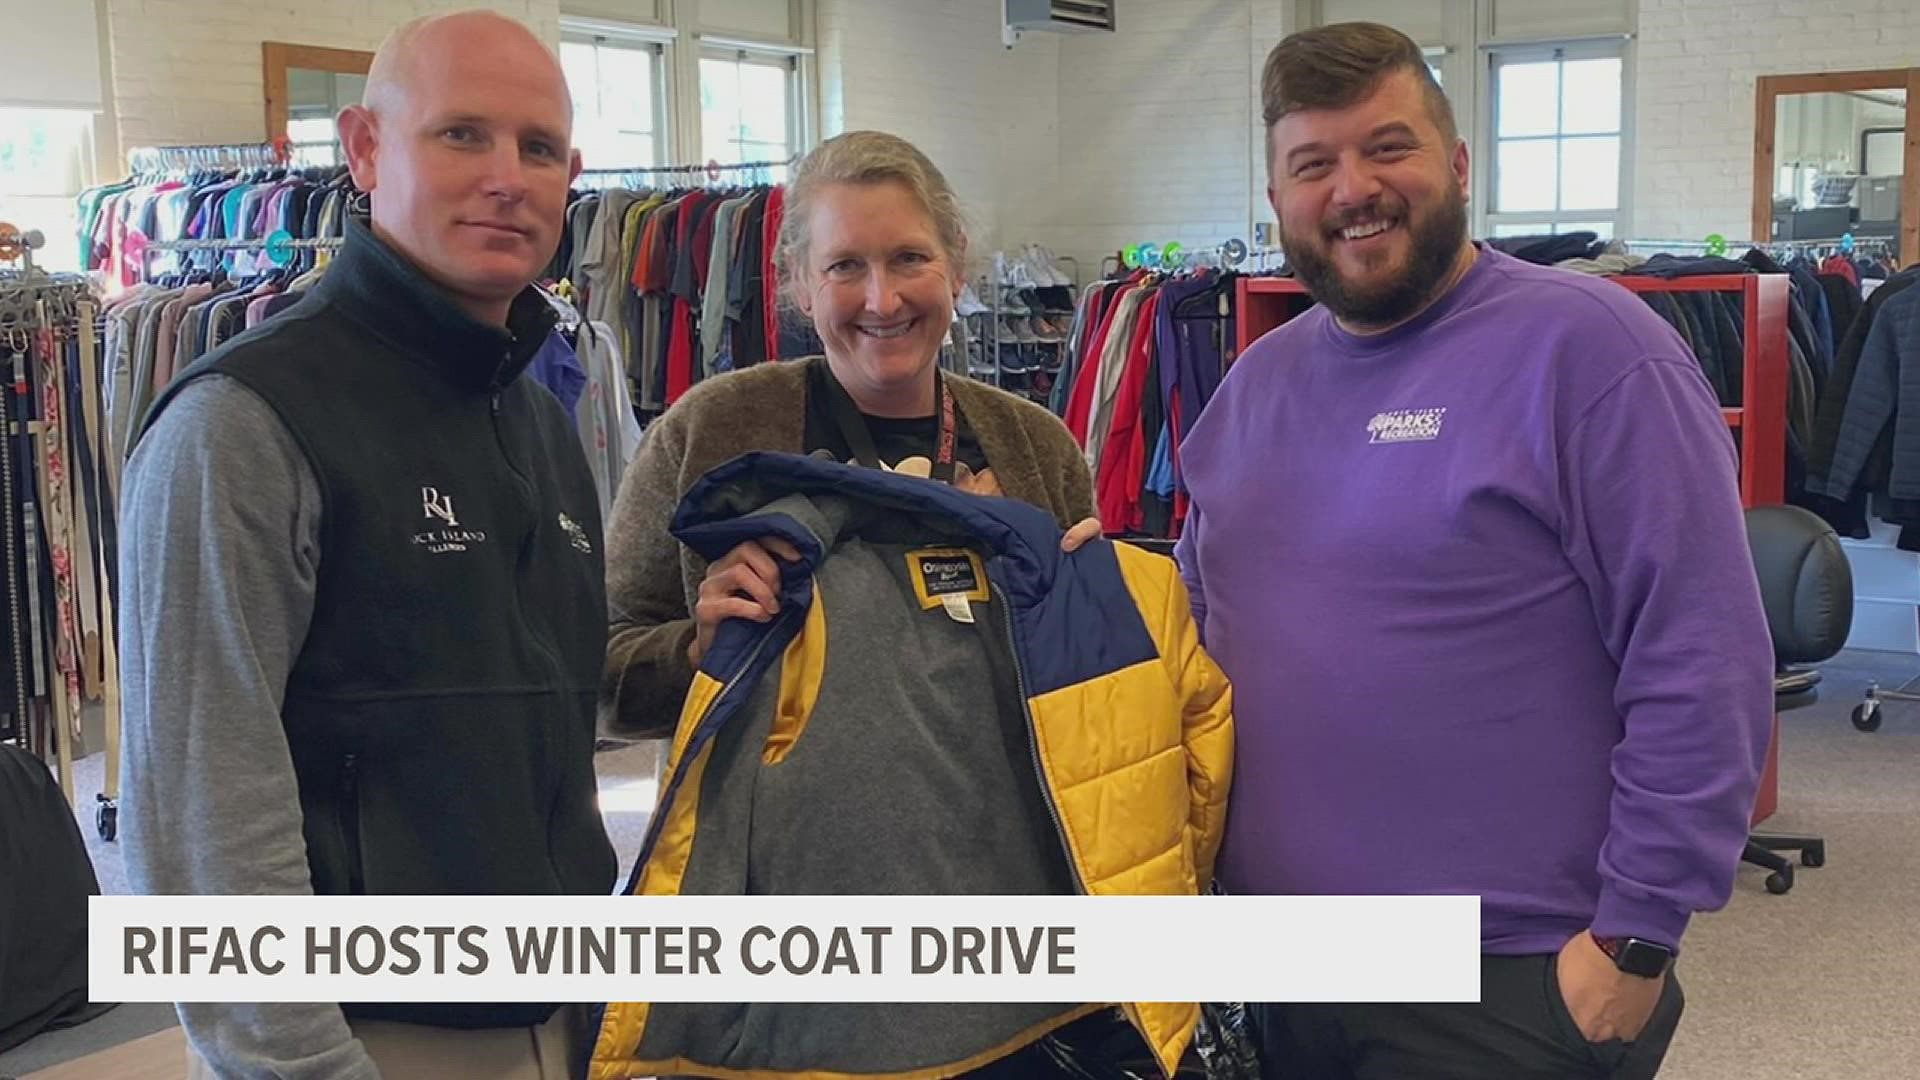 Donations of coats, hats, and other winter clothing items must be dropped off at RIFAC by October 31.